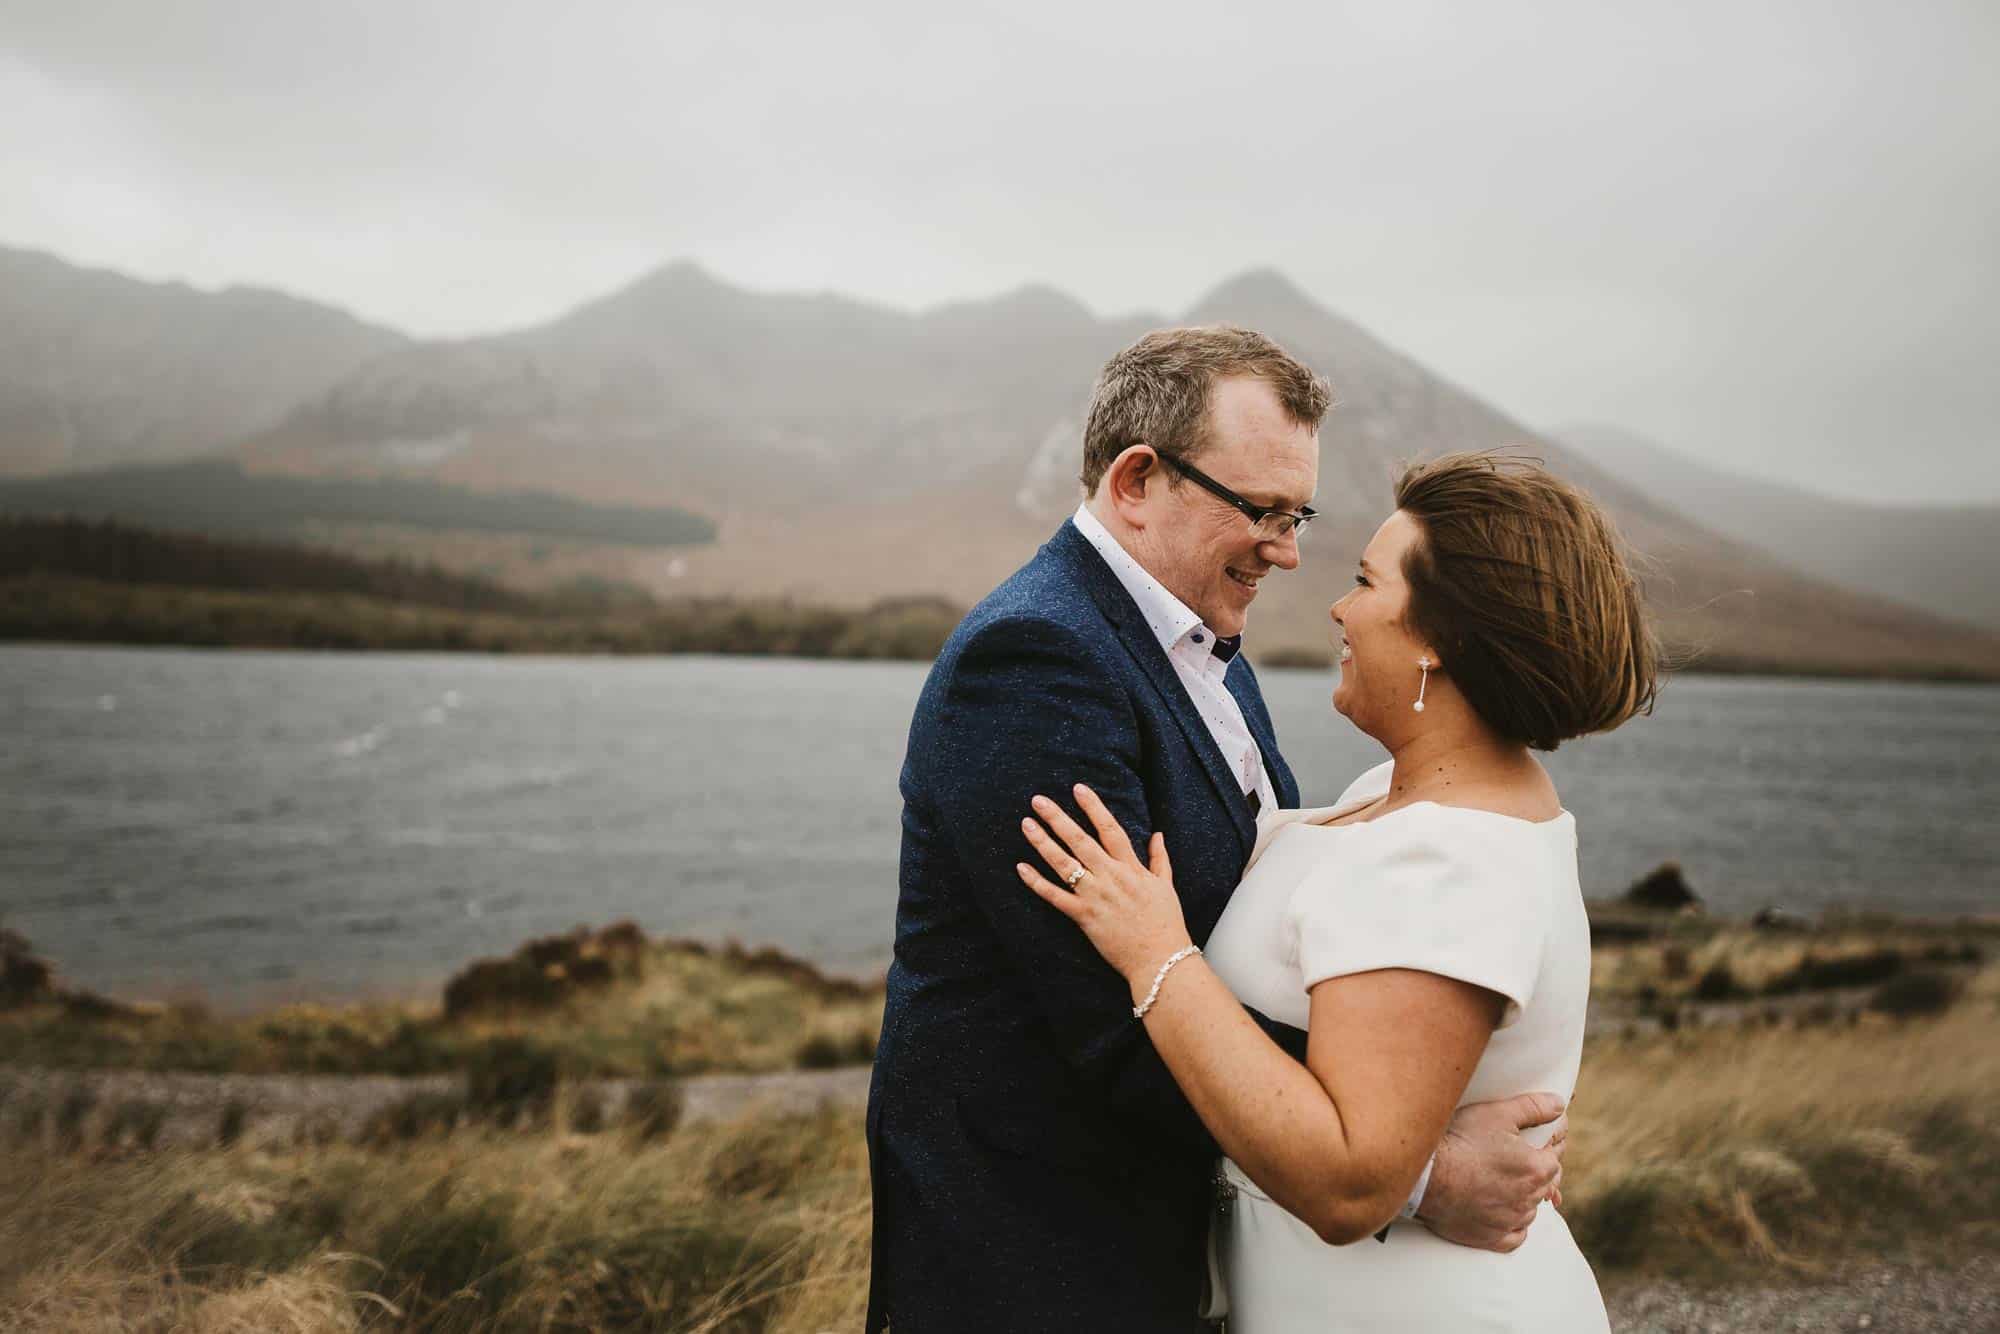 Planning for Elopements in Ireland We did it